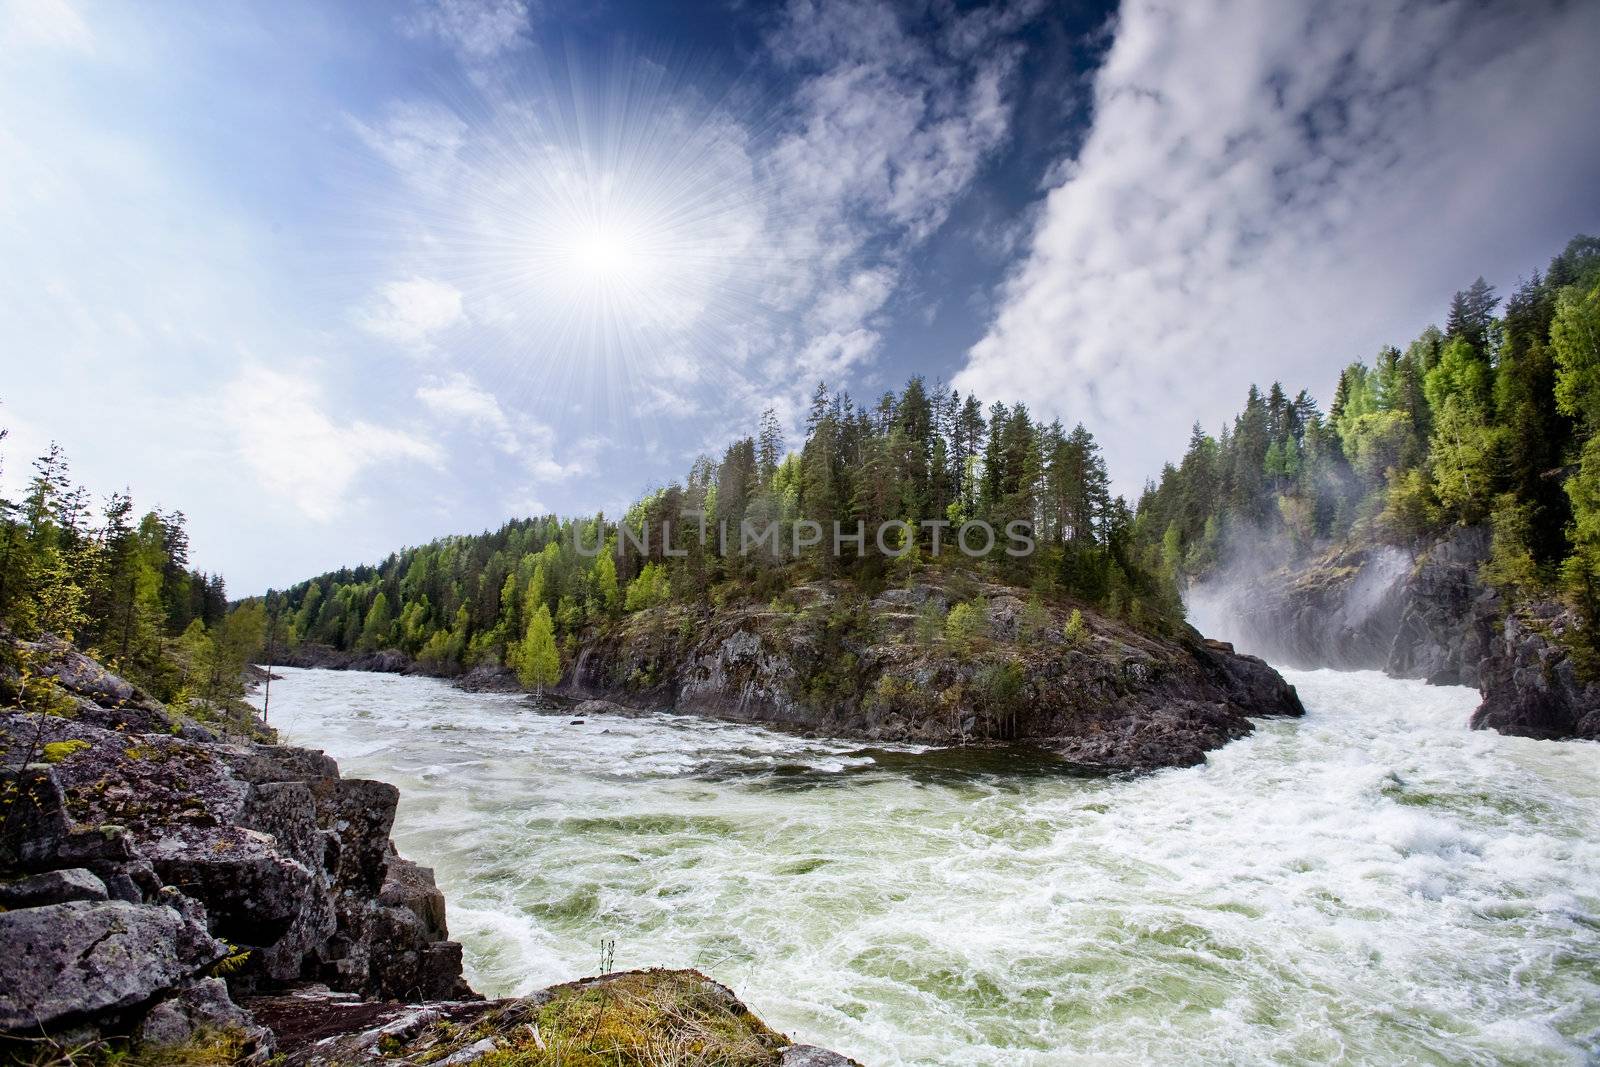 A nature landscape of river rapids in Norway